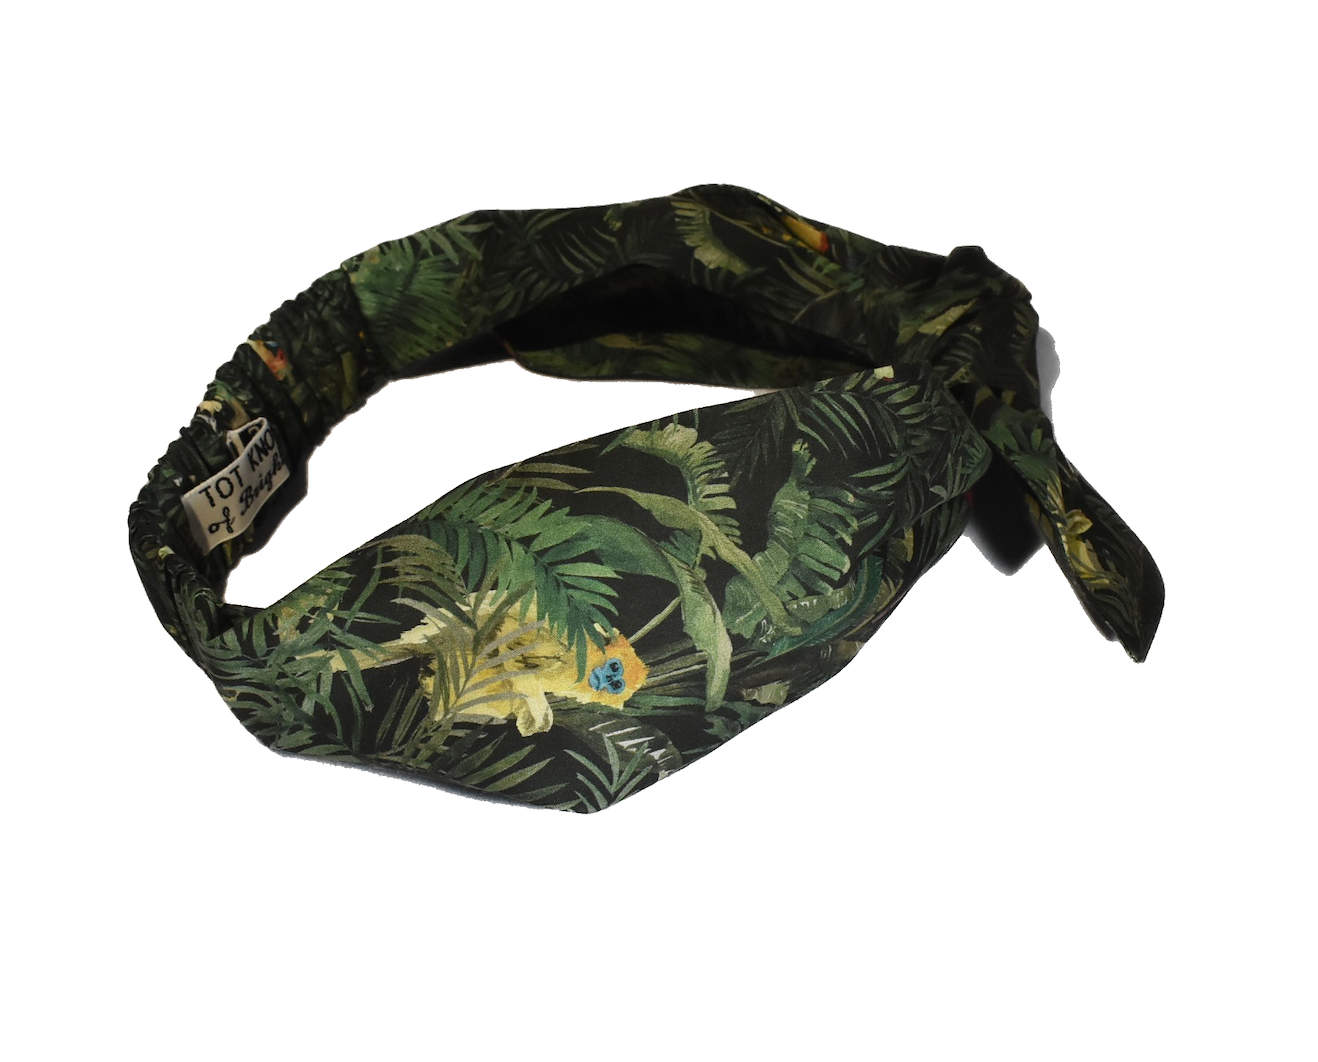 Kids Knot Tie hairband - Liberty of London Tou-Can Hide